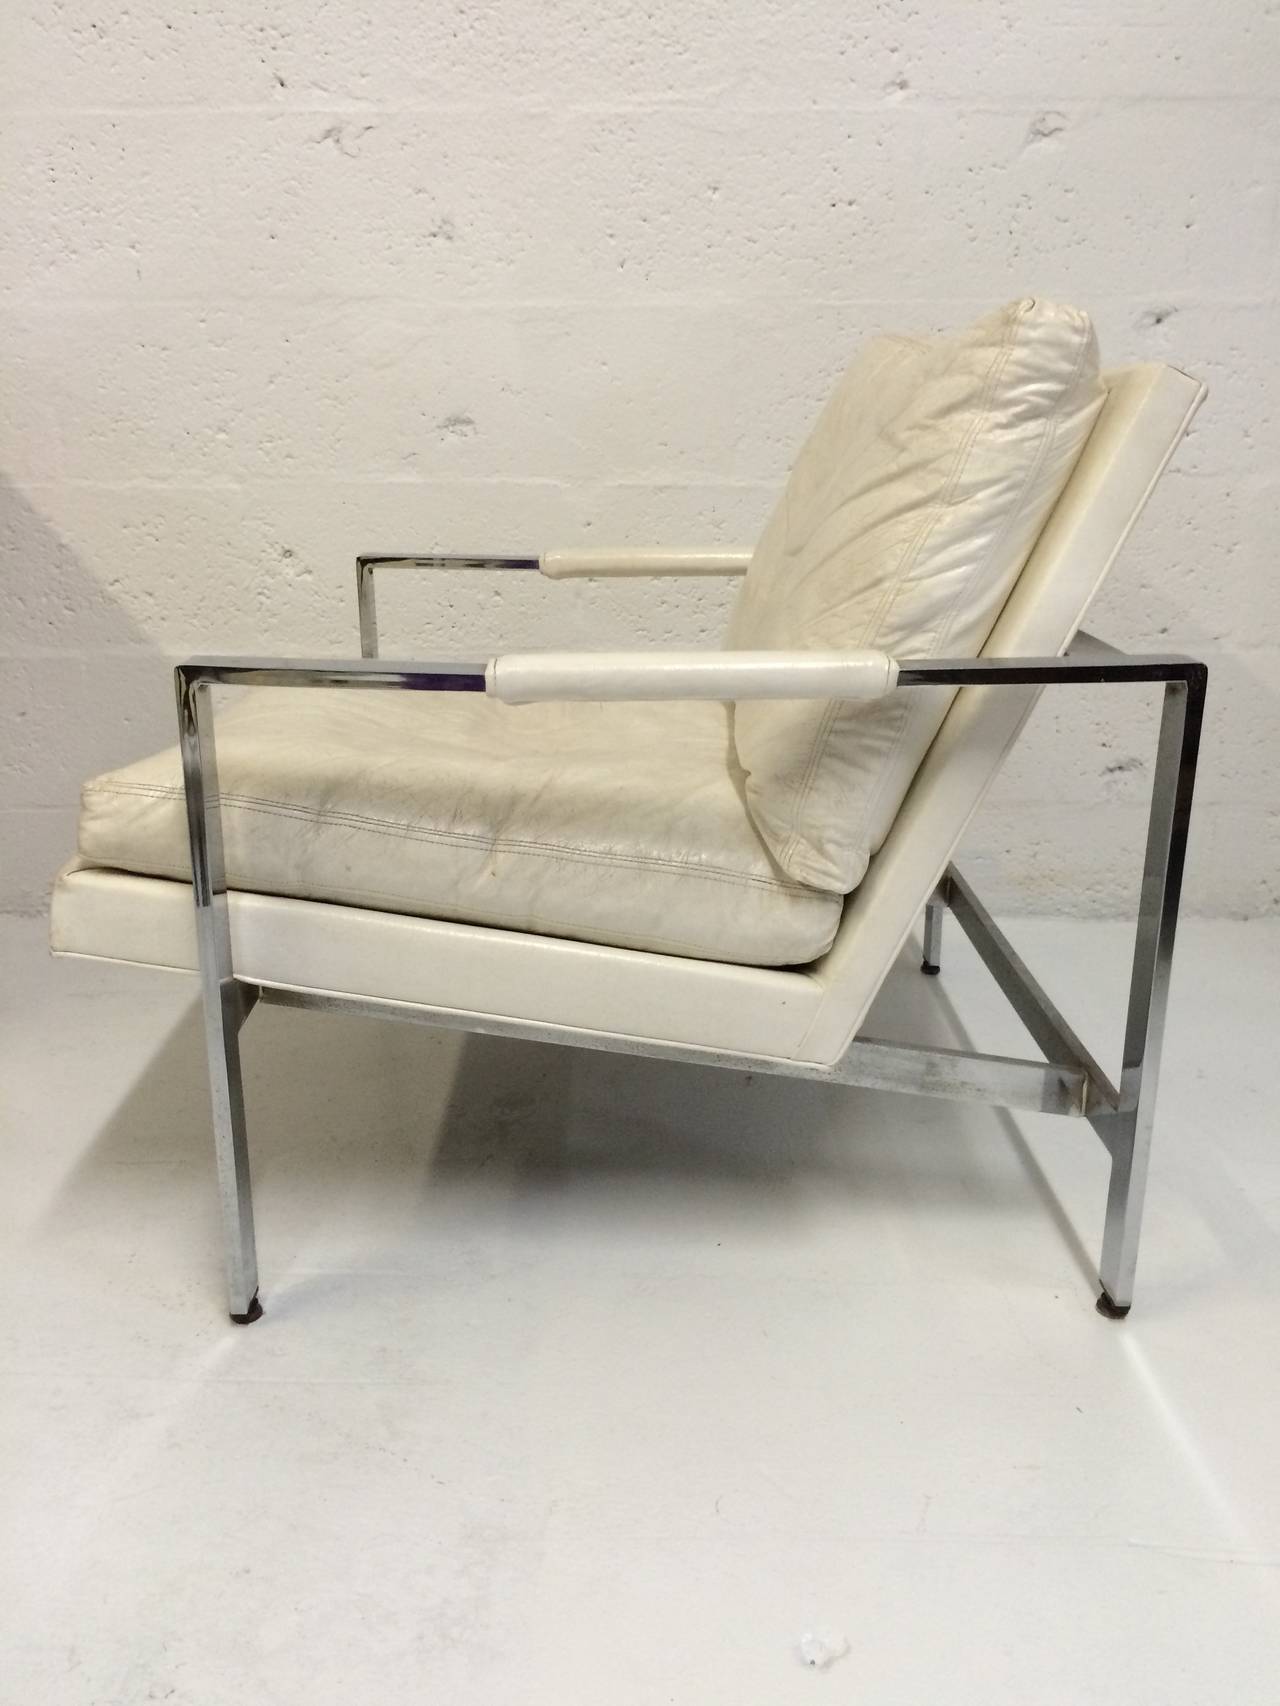 Pair of original white naugahyde and chrome club chairs designed by Milo Baughman for Thayer Coggin.

Reupholstery reccommended.